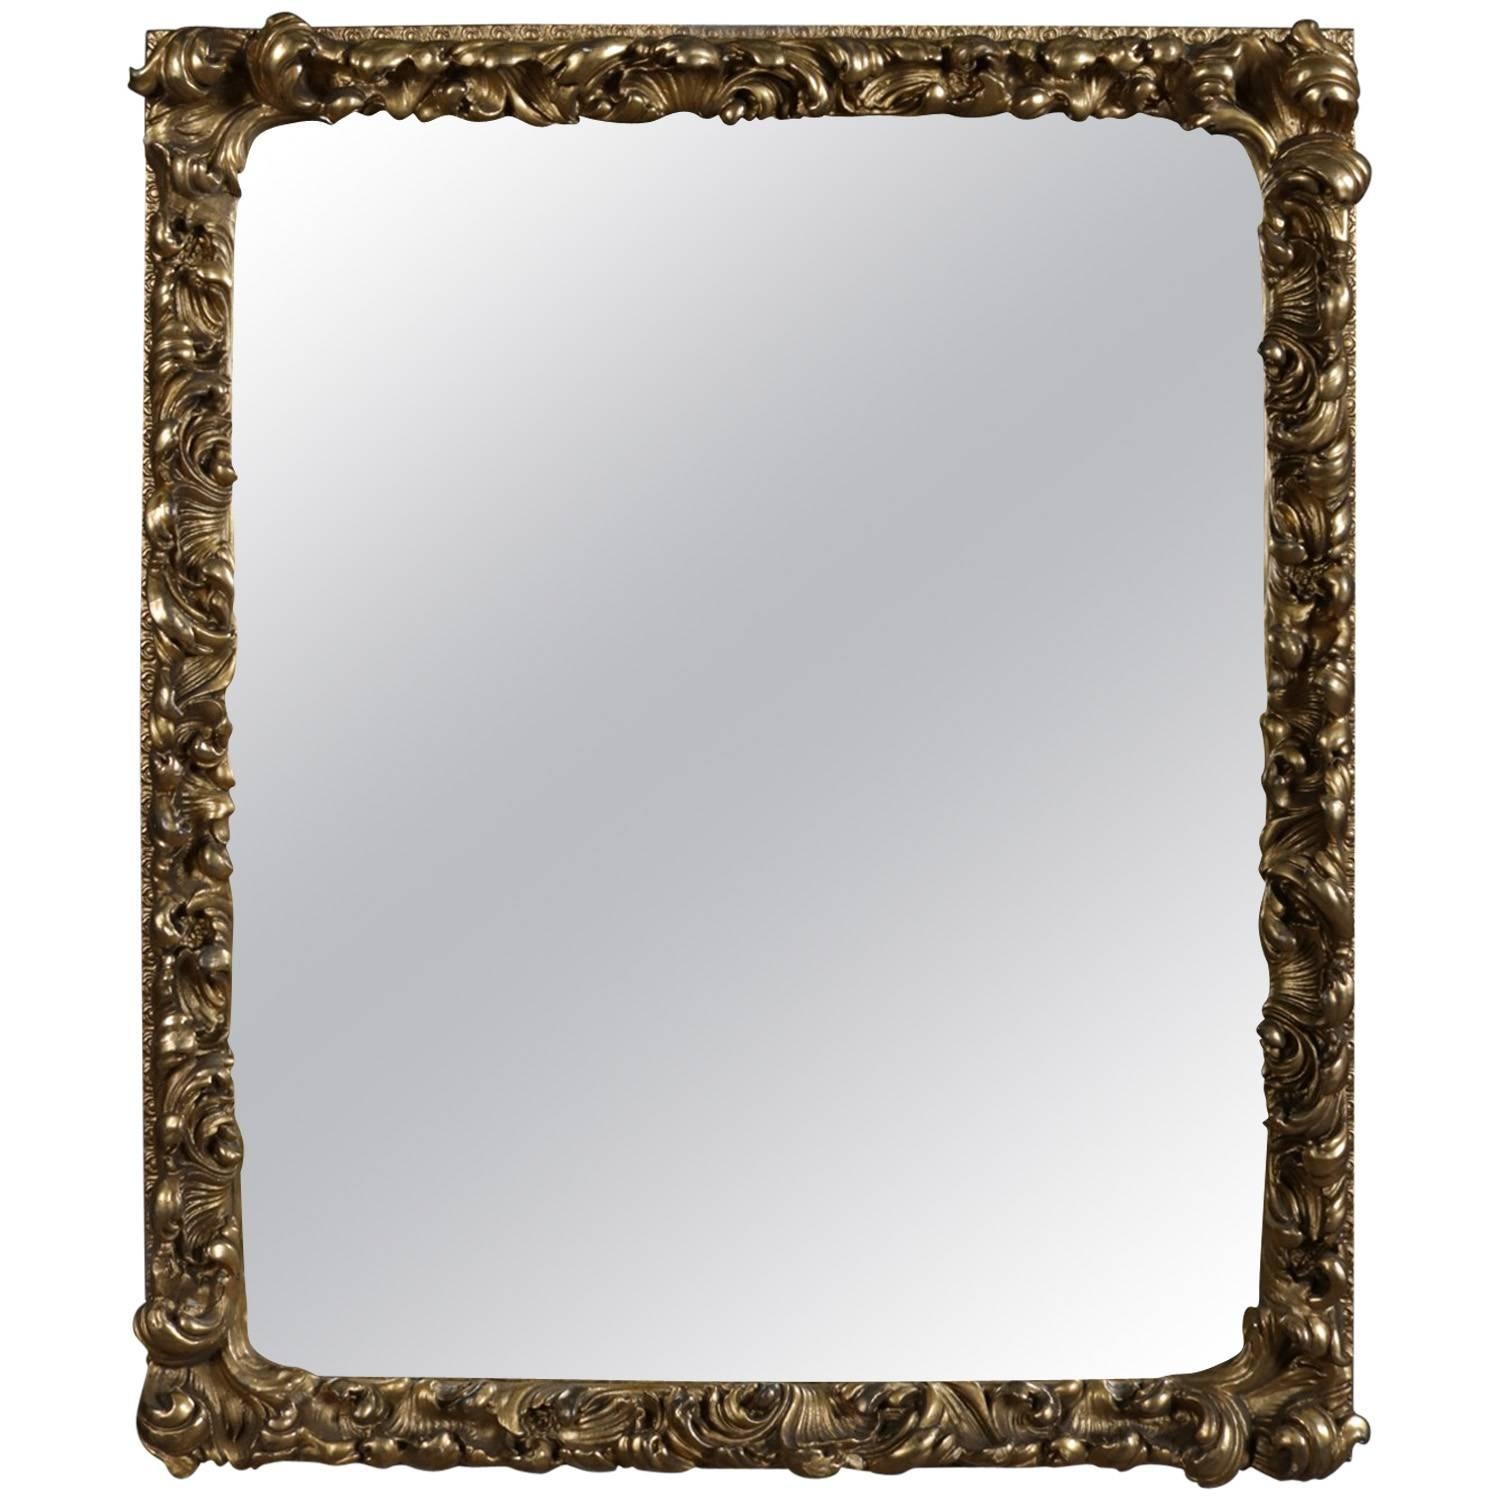 Antique First Finish Gilt High Relief Foliate Form Wall Mirror, 19th Century